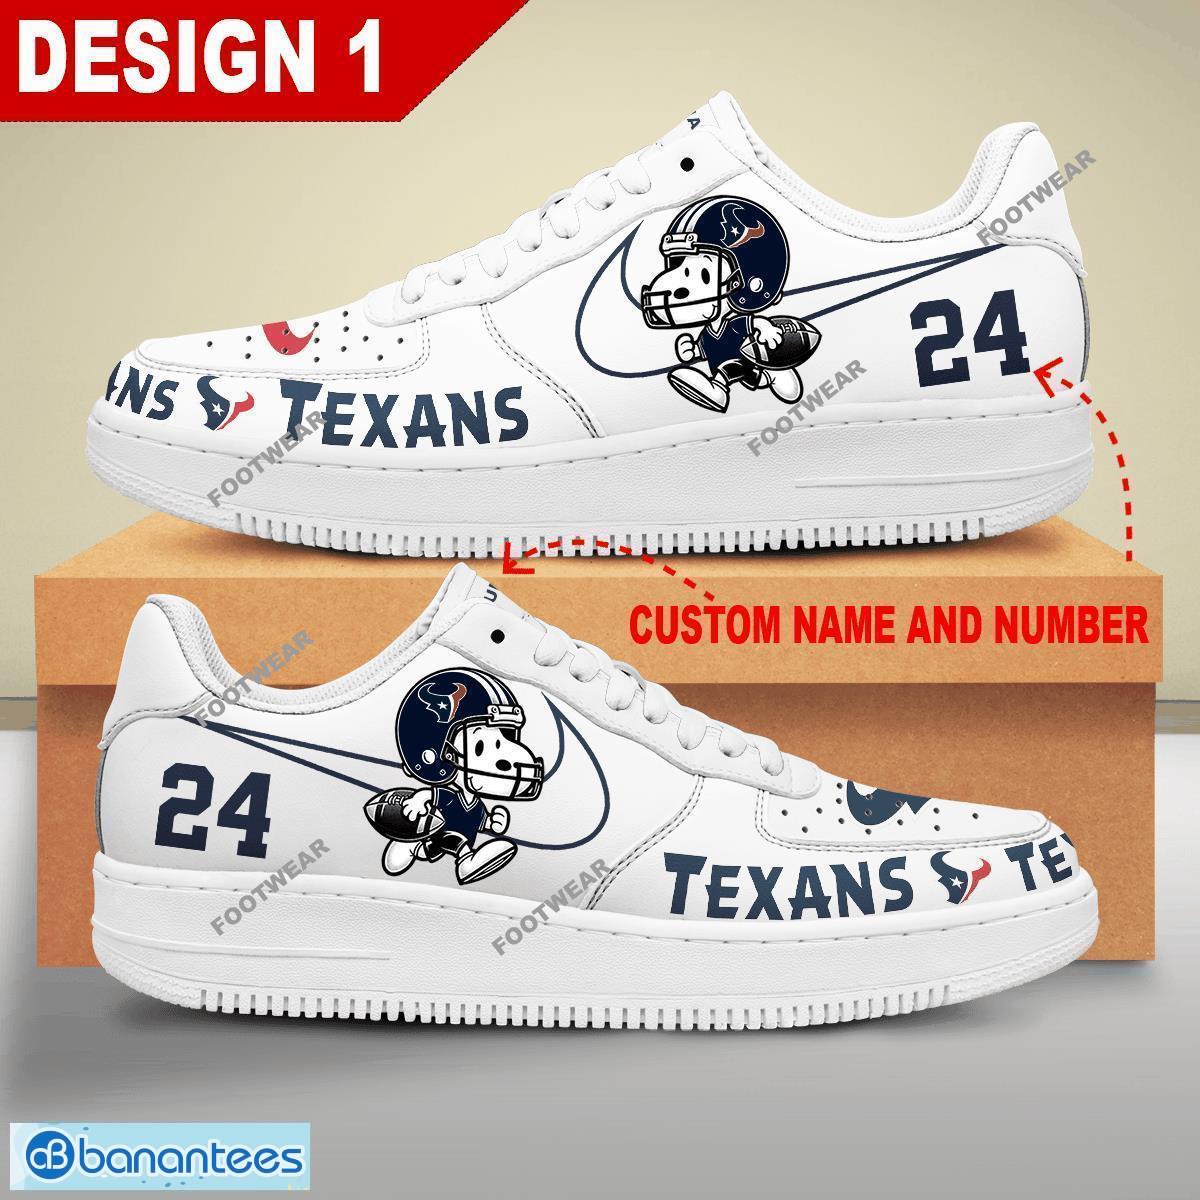 Custom Number And Name NFL Houston Texans Snoopy Play Funny Football Air Force 1 Shoes Multiple Design - NFL Houston Texans Snoopy Play Football Personalized Air Force 1 Shoes Design 1